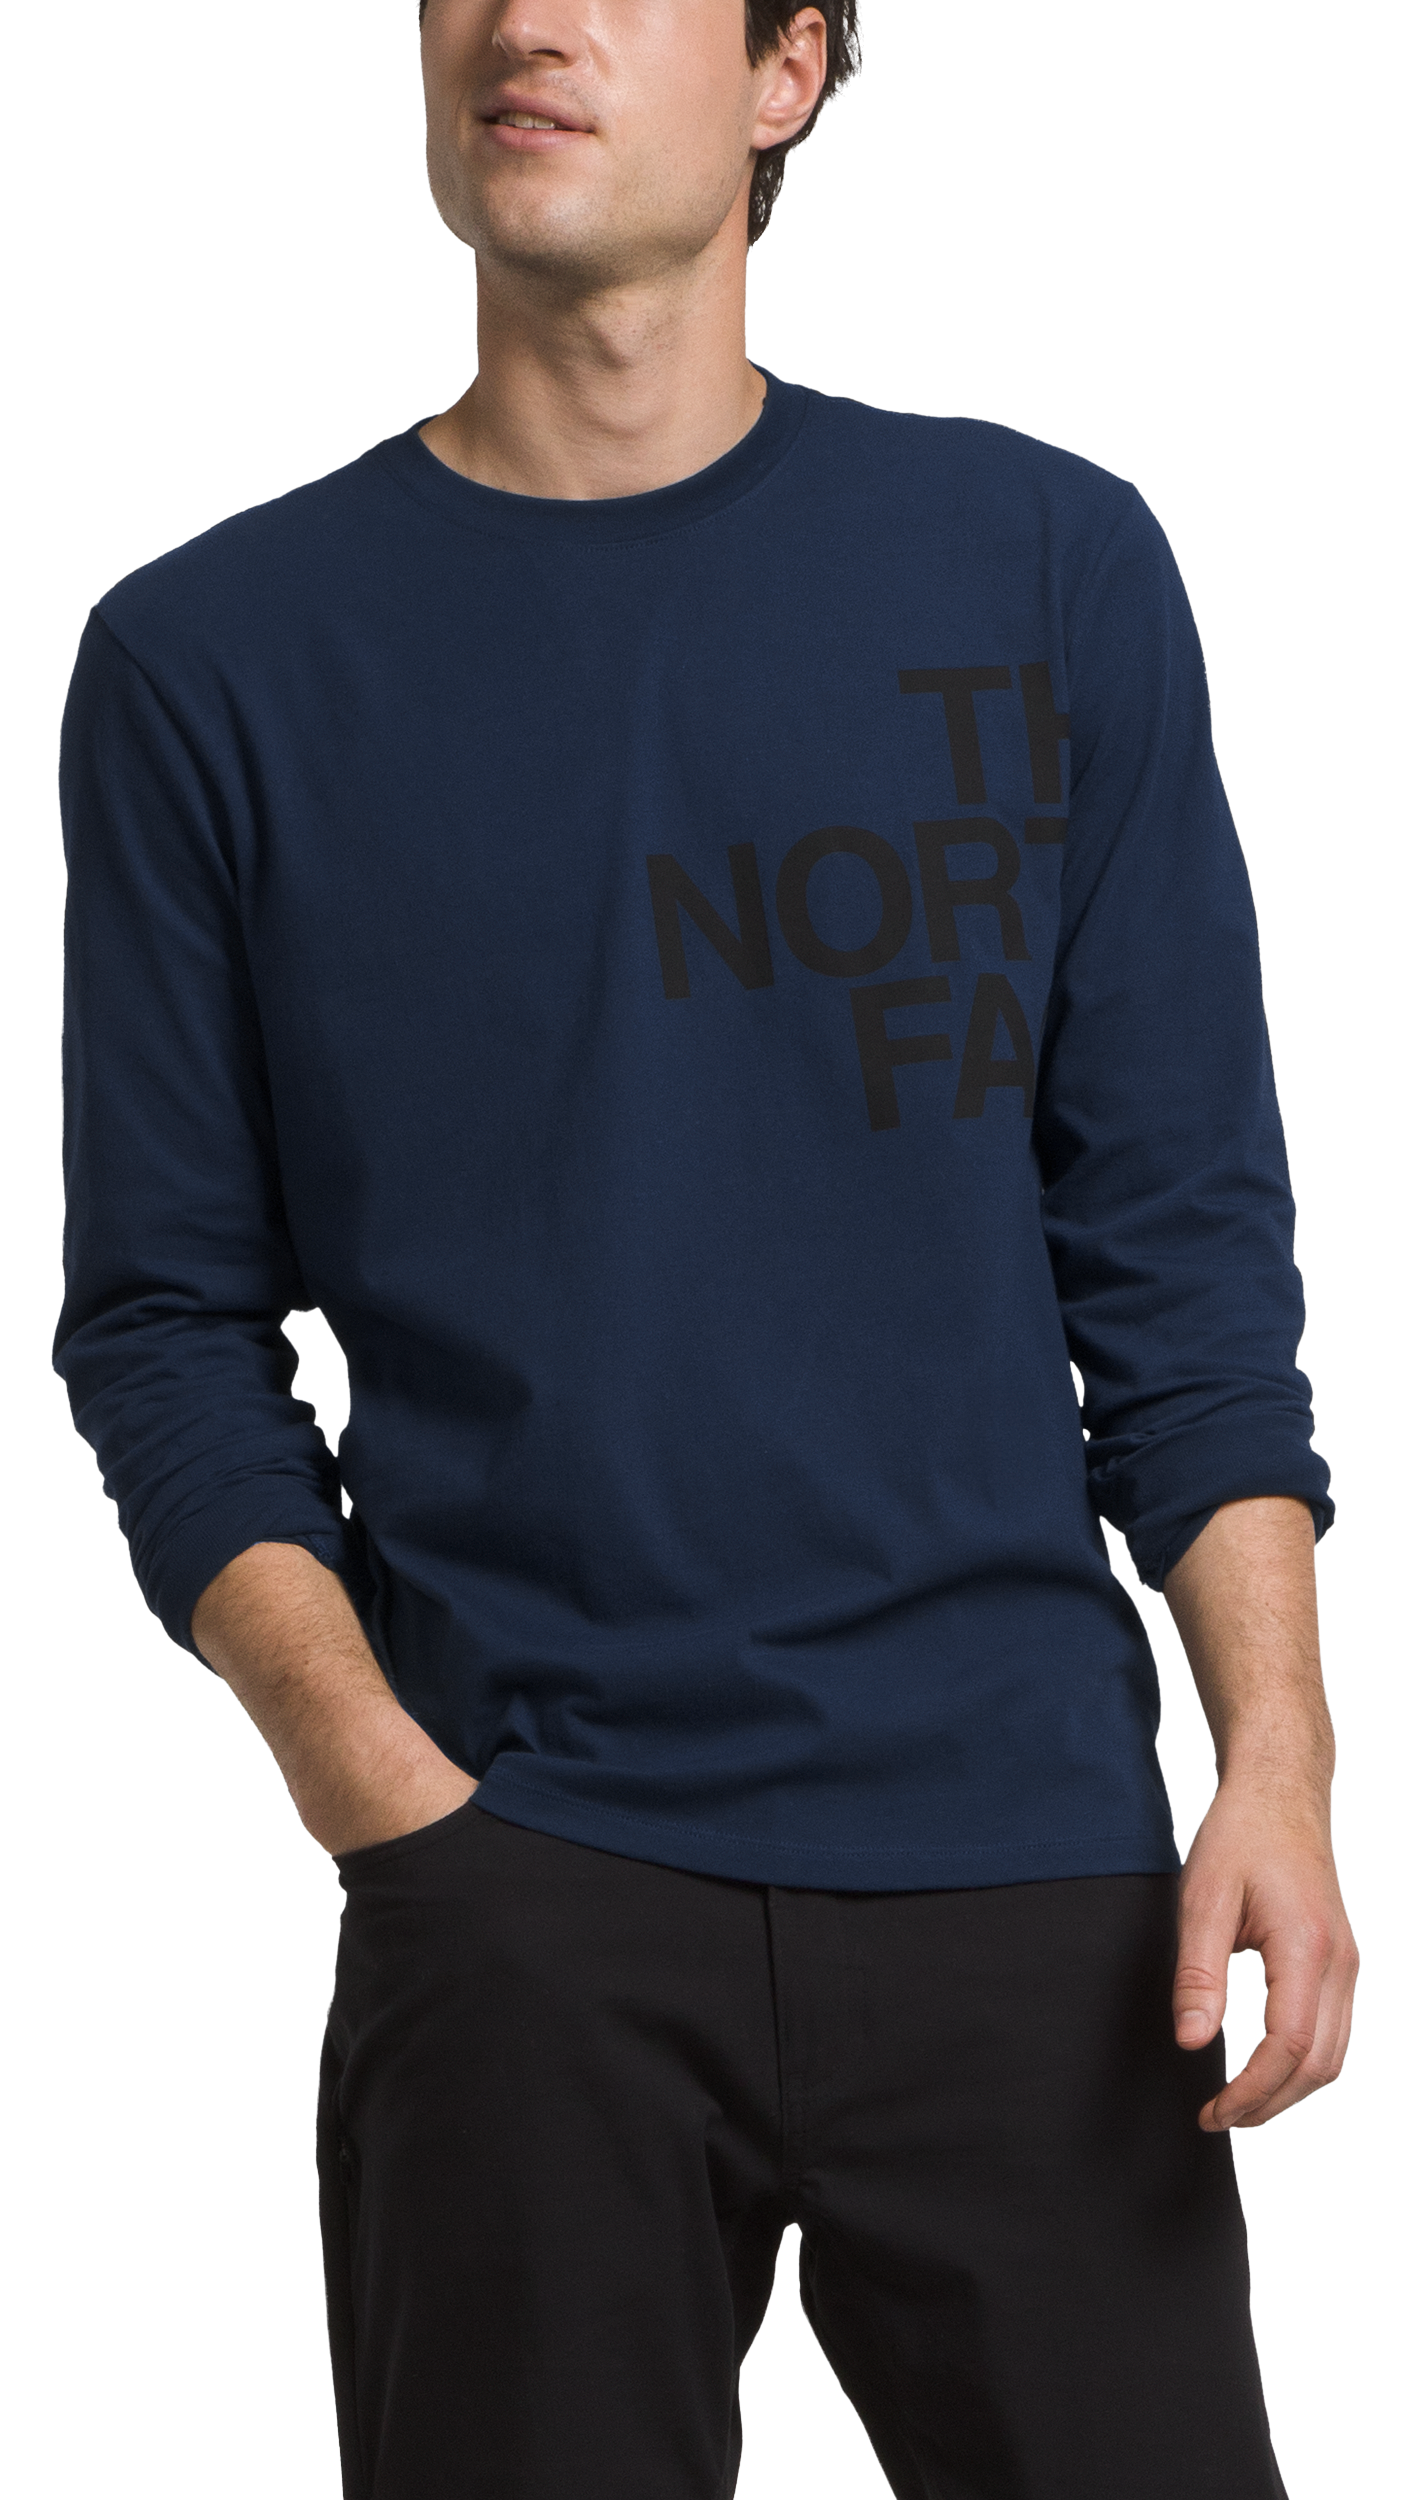 The North Face Brand Proud Long-Sleeve T-Shirt for Men - Summit Navy/TNF Black - L